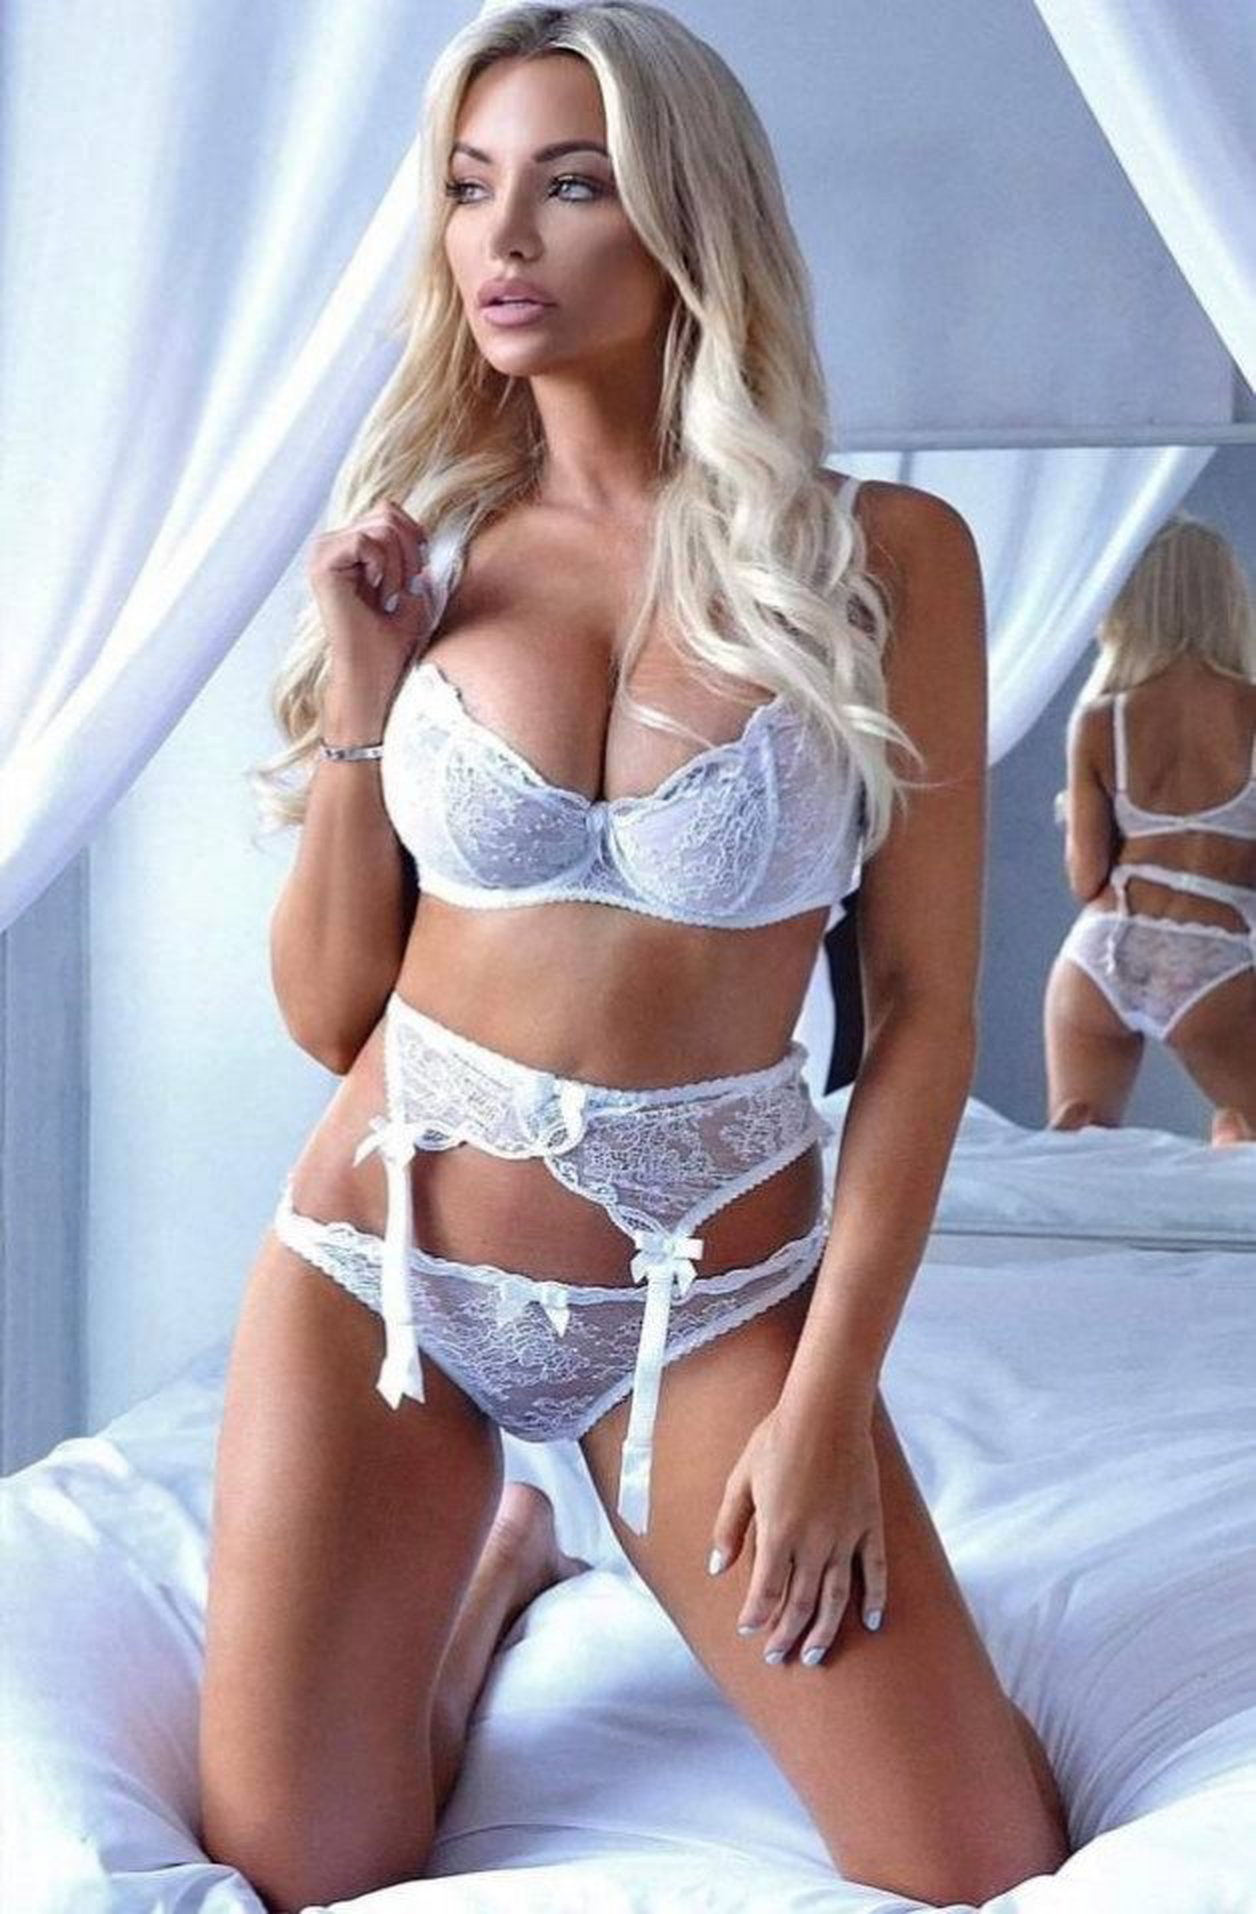 Watch the Photo by Racketter with the username @Racketter, posted on March 1, 2024. The post is about the topic Sexy Lingerie. and the text says '#LindseyPelas'